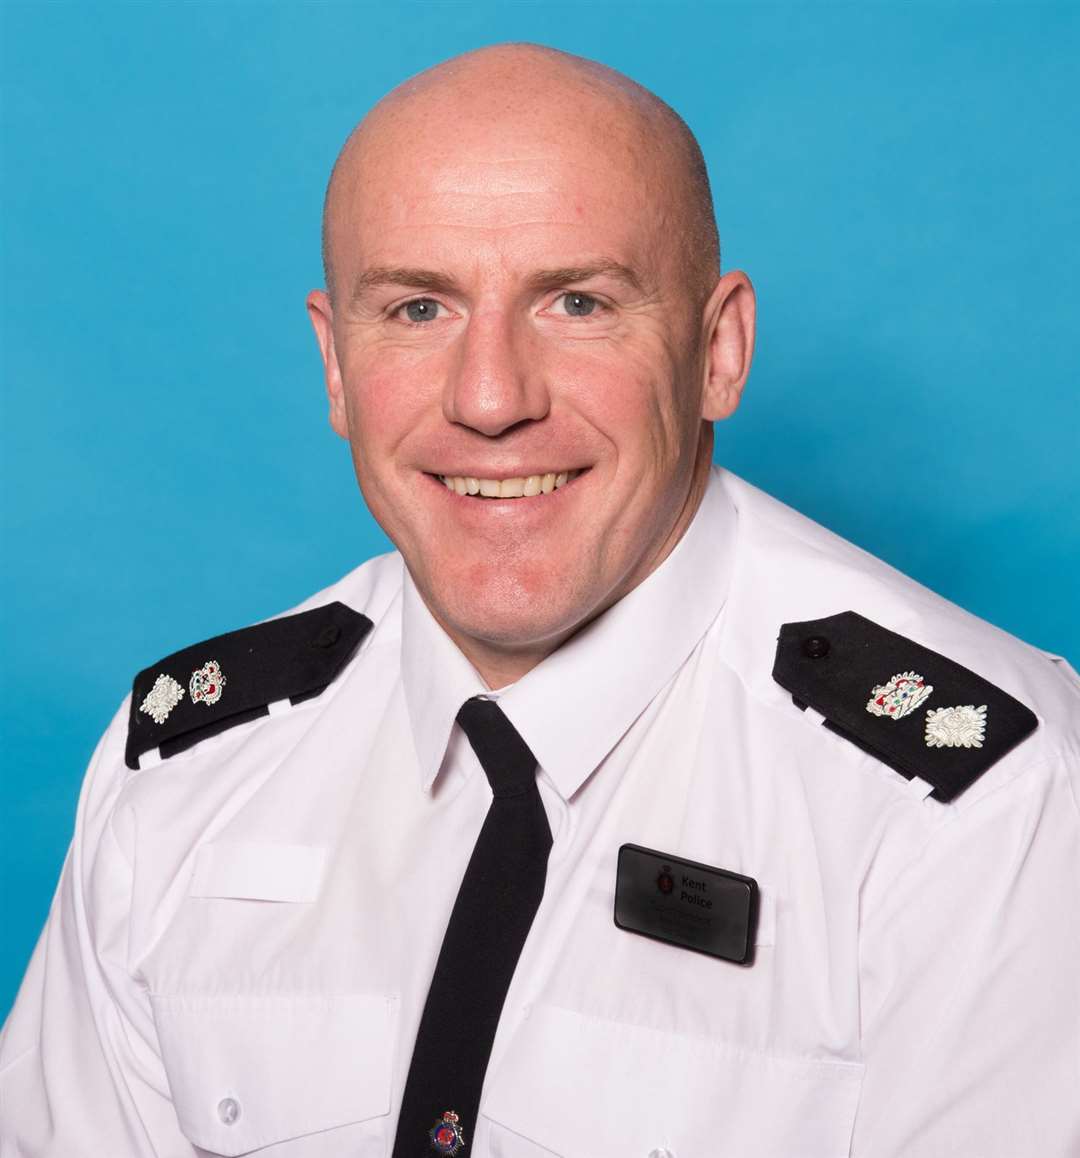 Detective Chief Superintendent Andrew Pritchard. Image from Kent Police